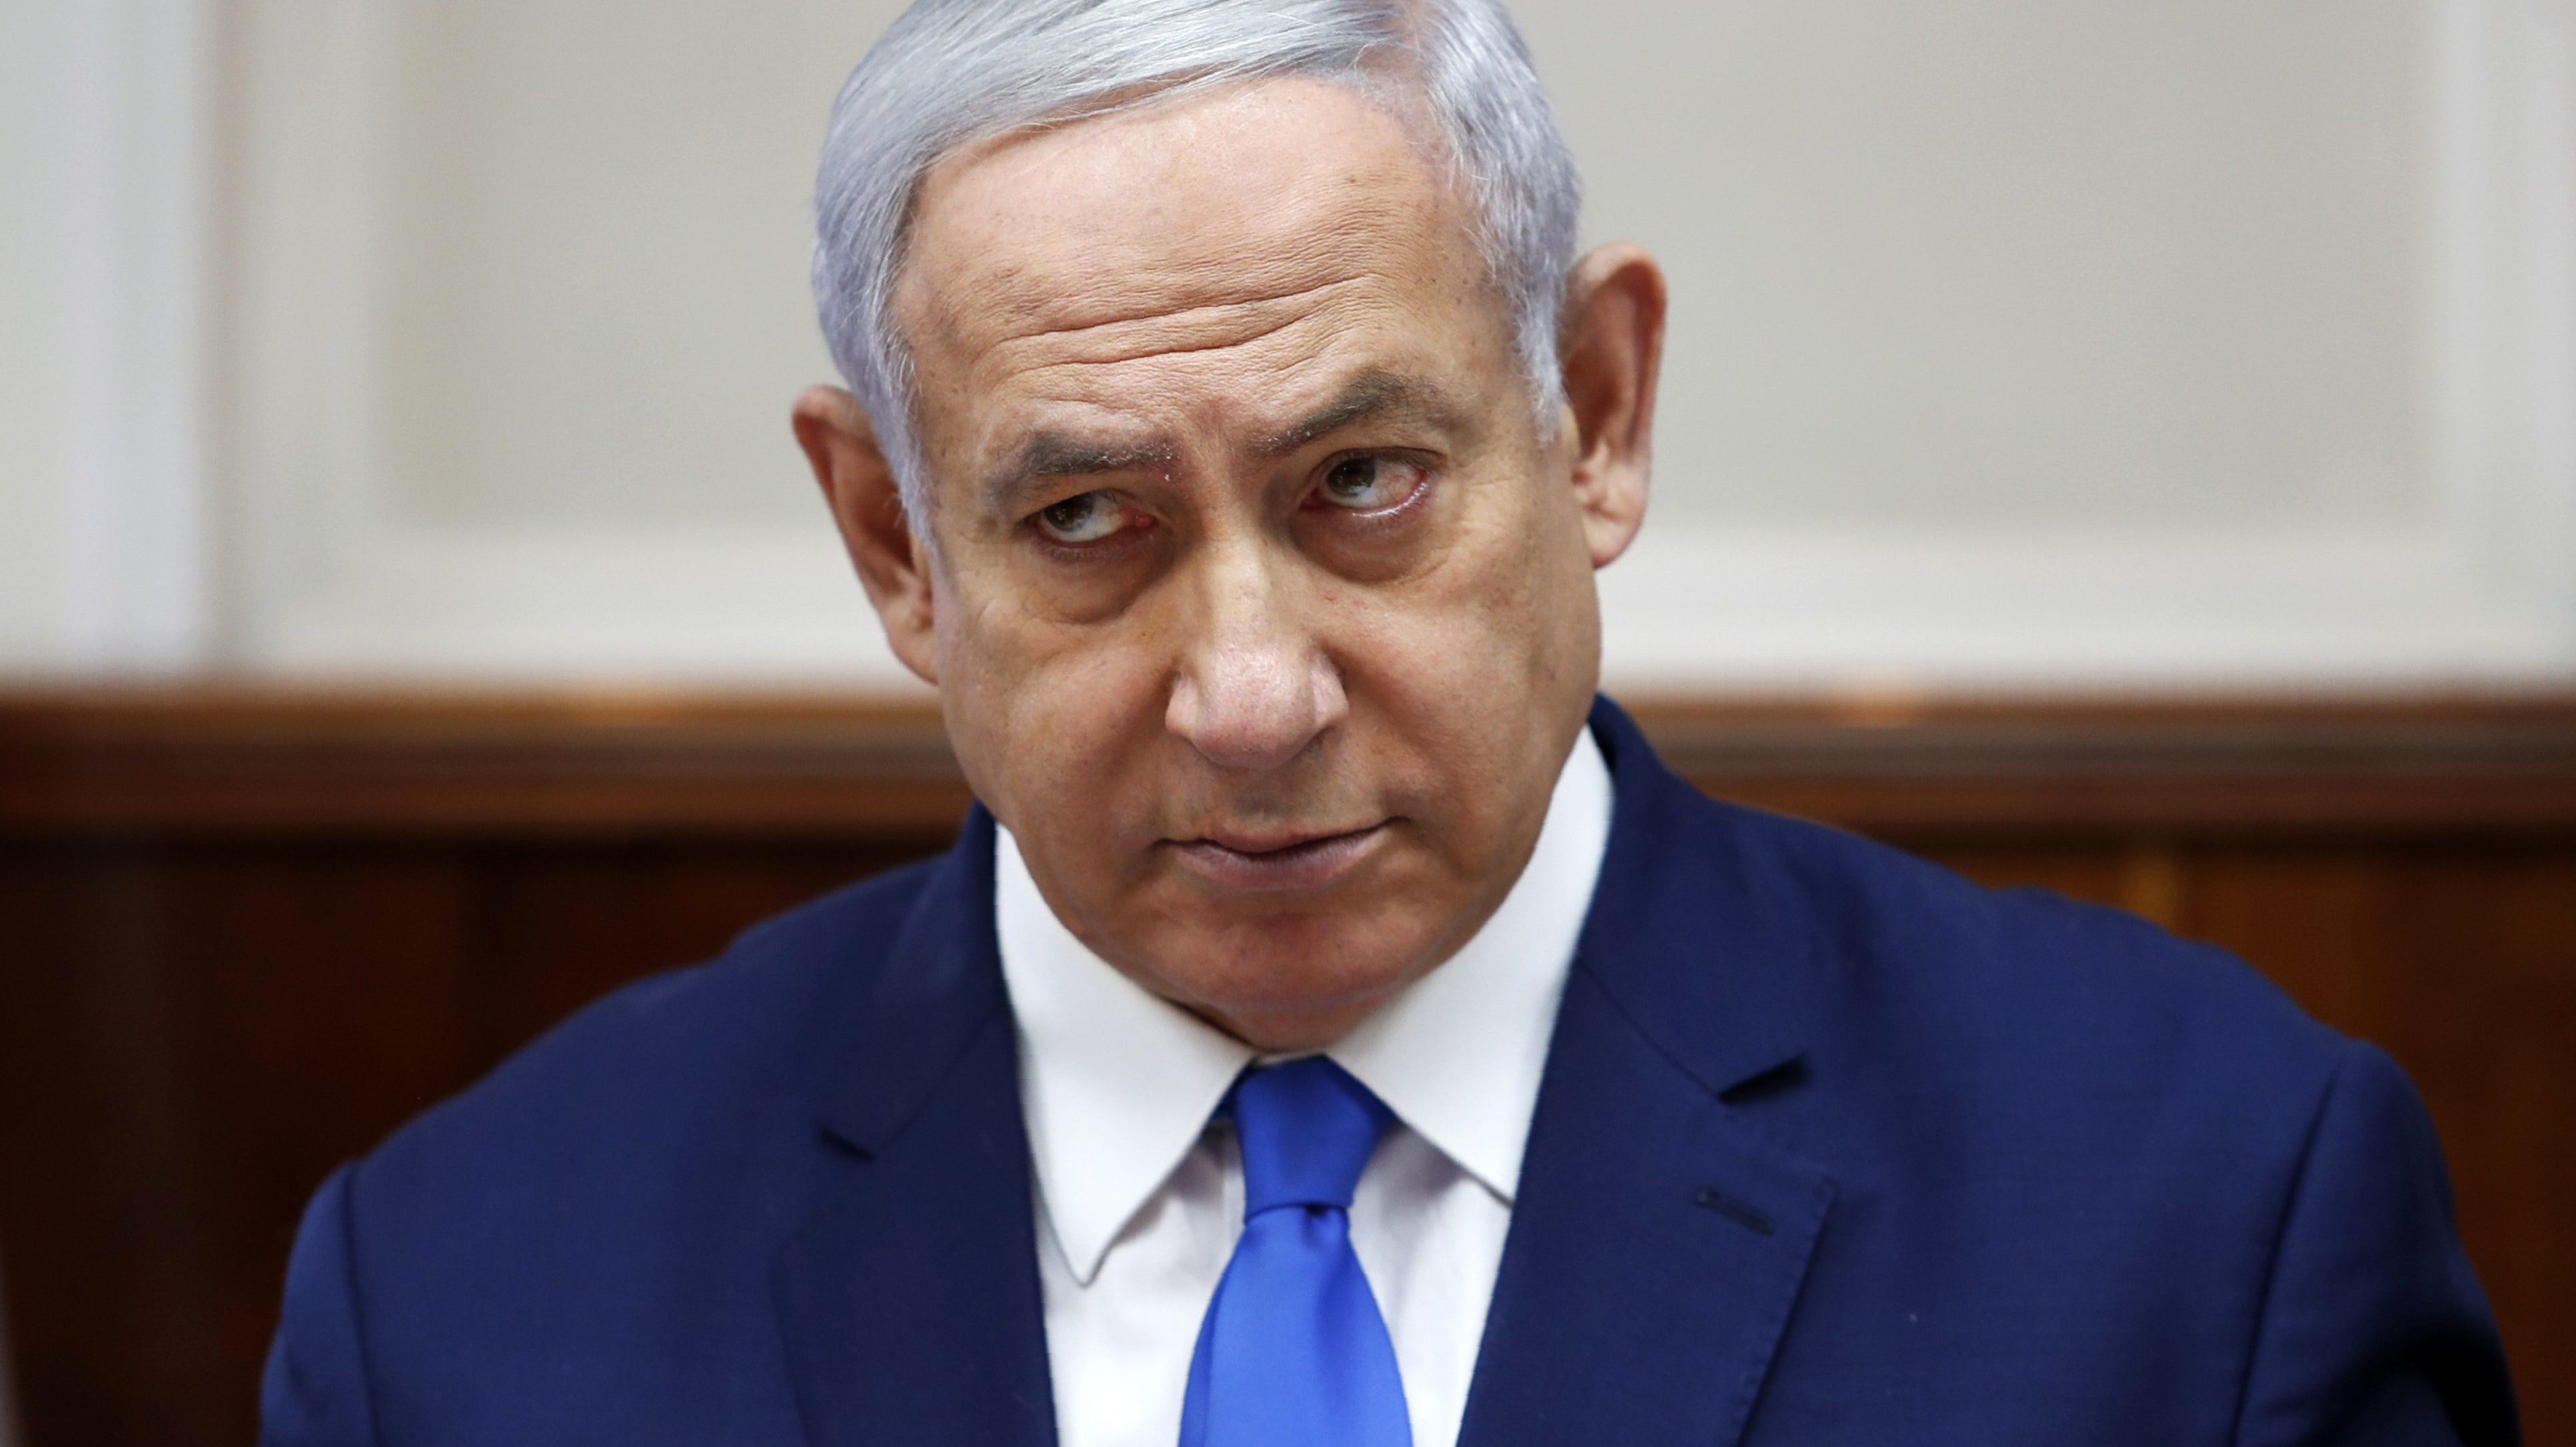 Netanyahu Vows Additional West Bank Annexations if Reelected